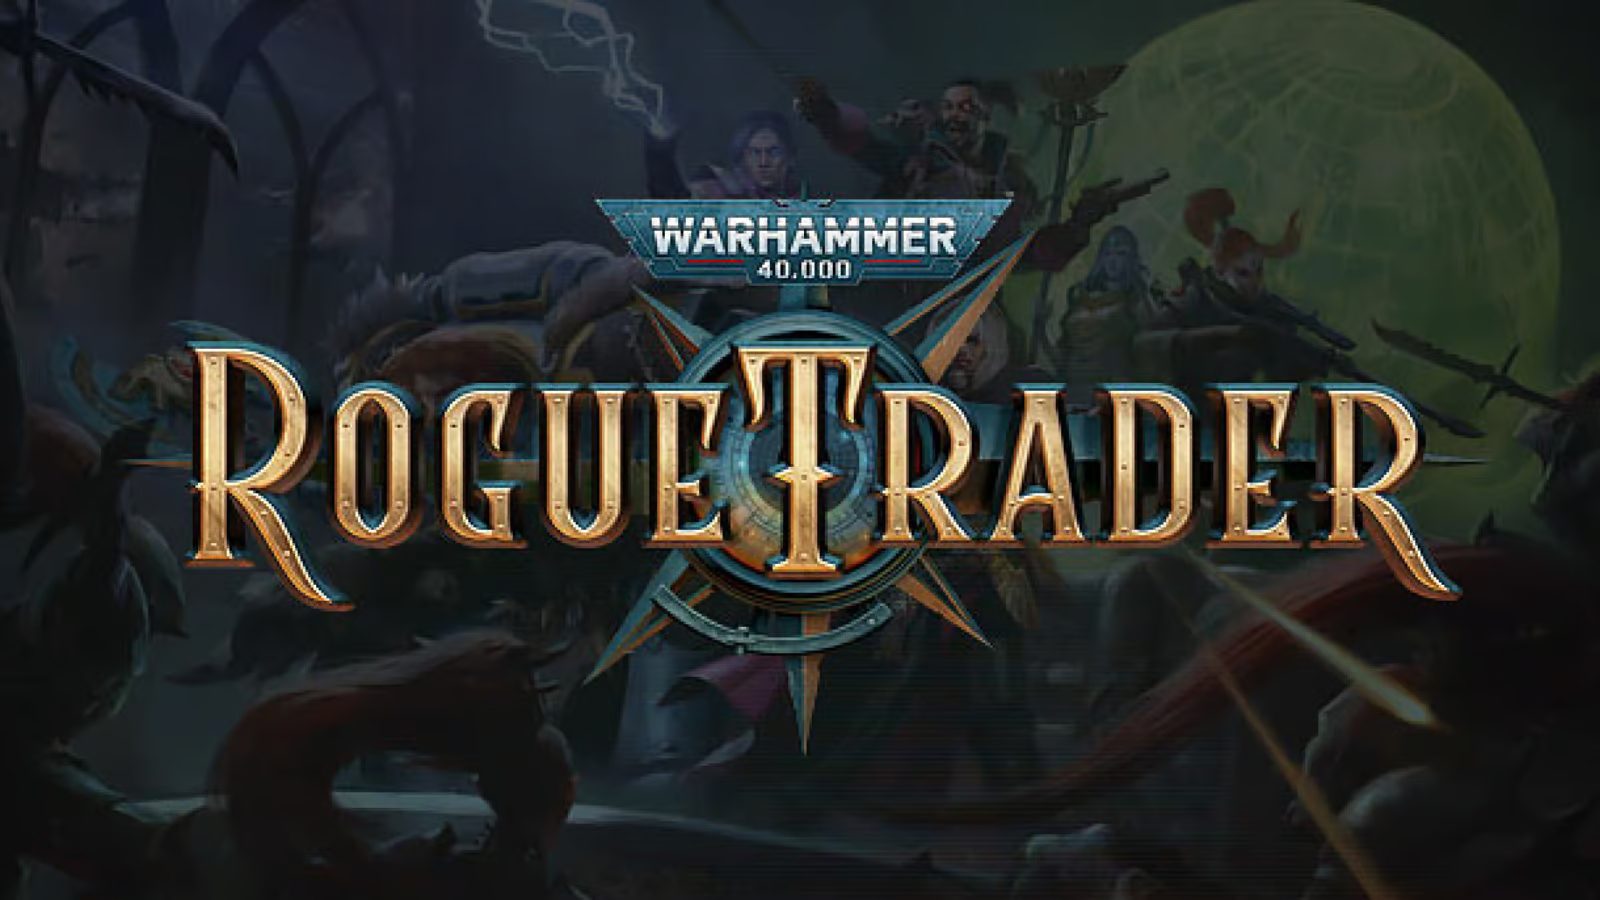 Warhammer 40,000: Rogue Trader Debuts in 3rd on the Steam Charts